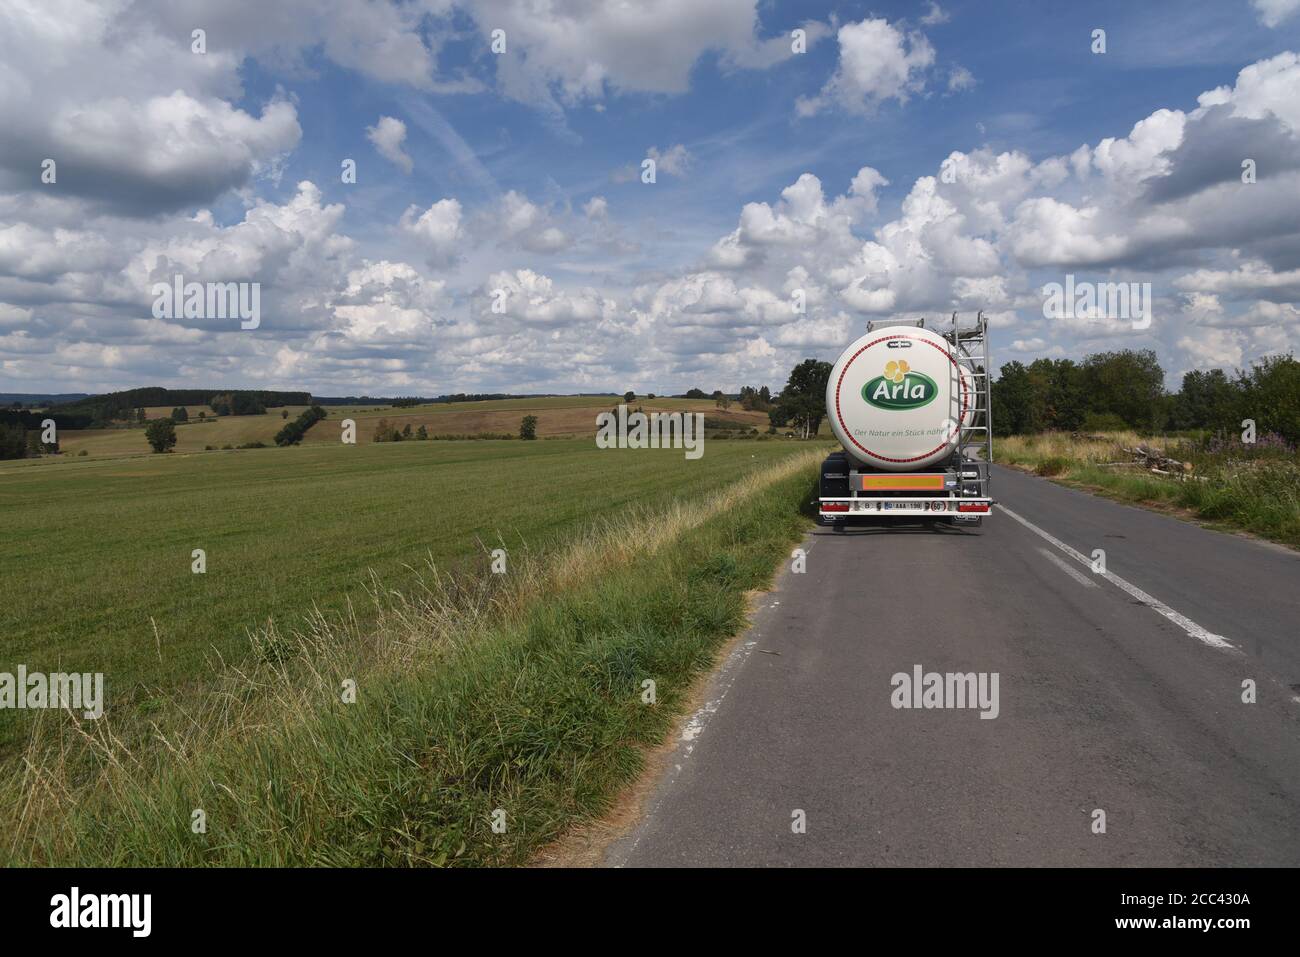 5 - Arla High Resolution Stock Photography and Images - Alamy